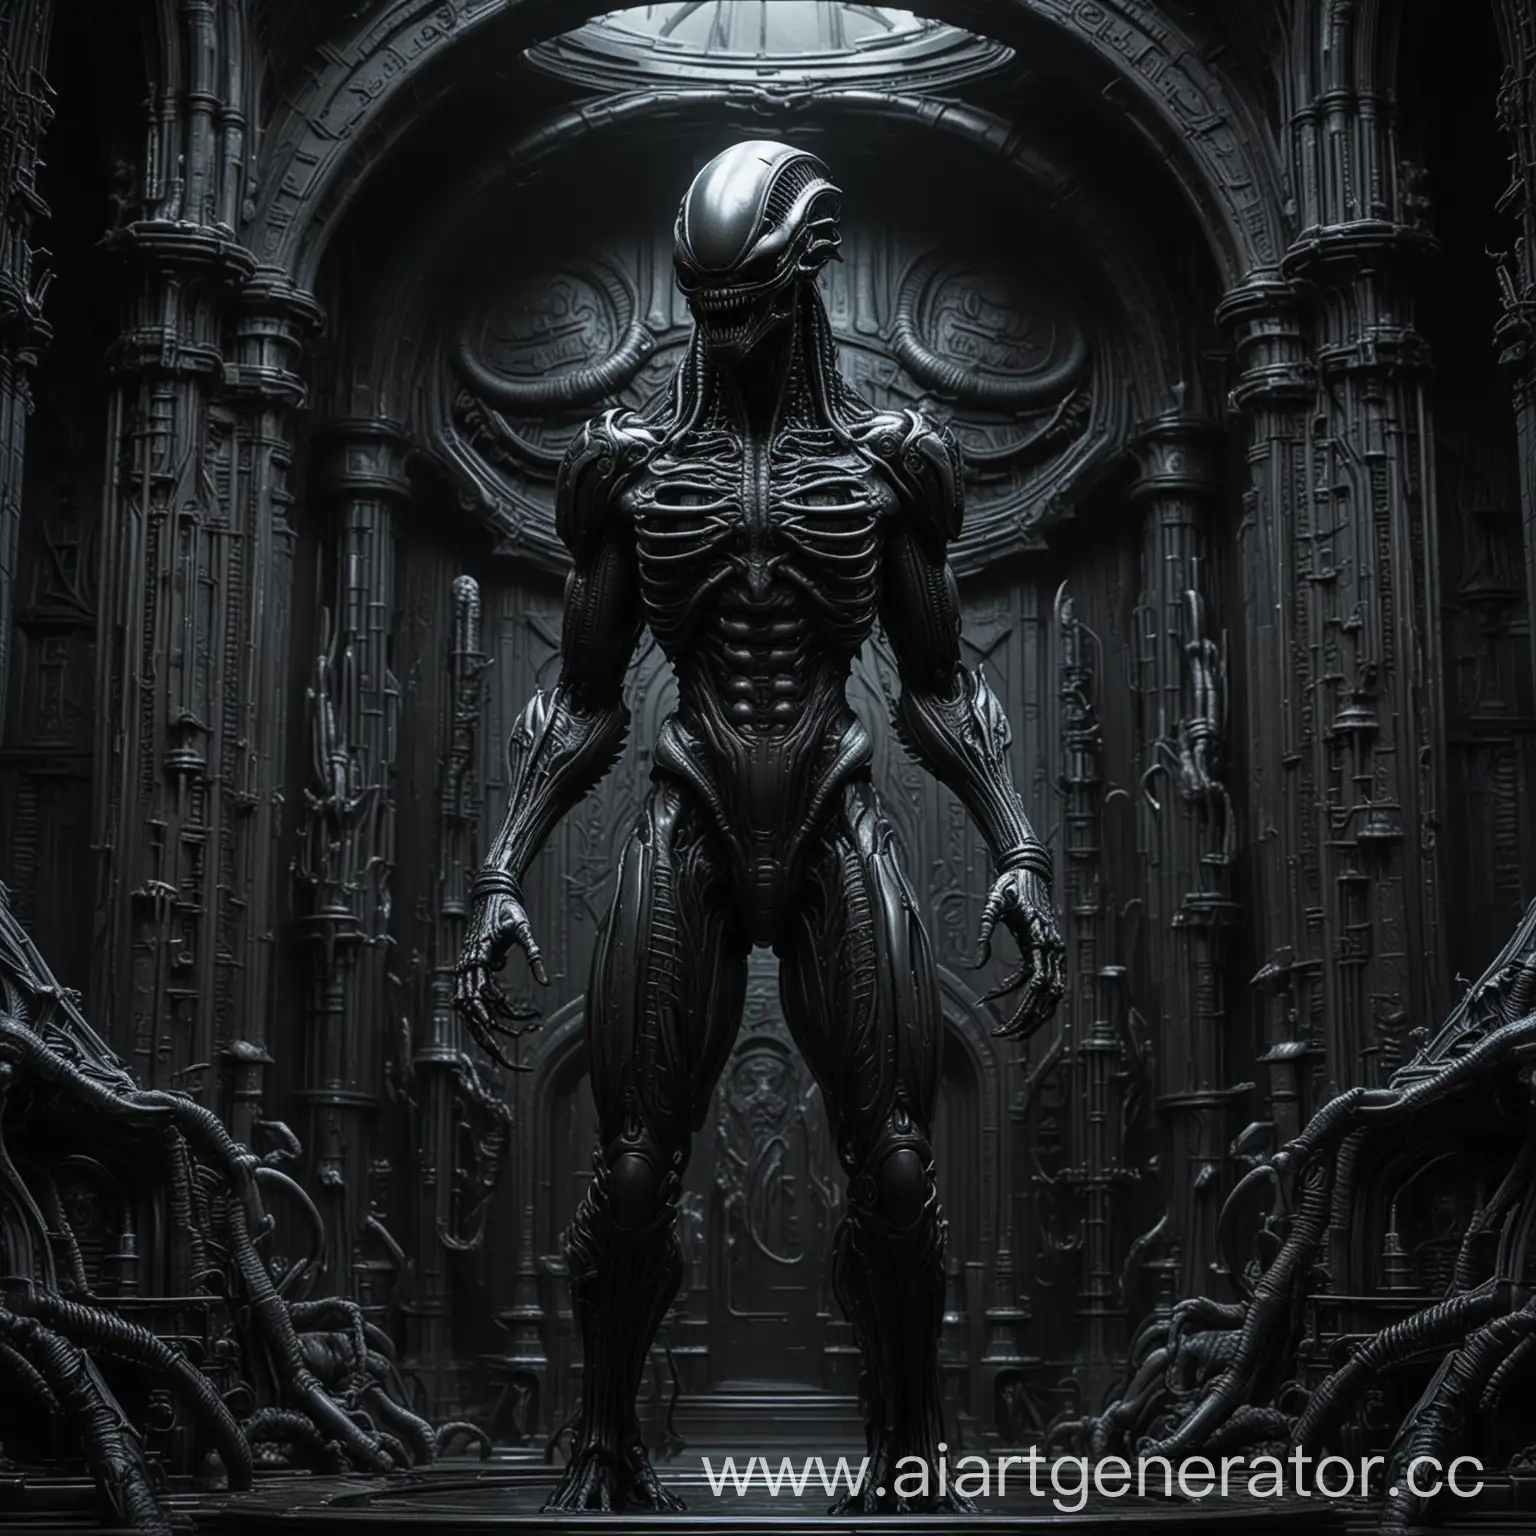 Xenomorph-Alien-Statue-in-Biomechanical-Gothic-Cathedral